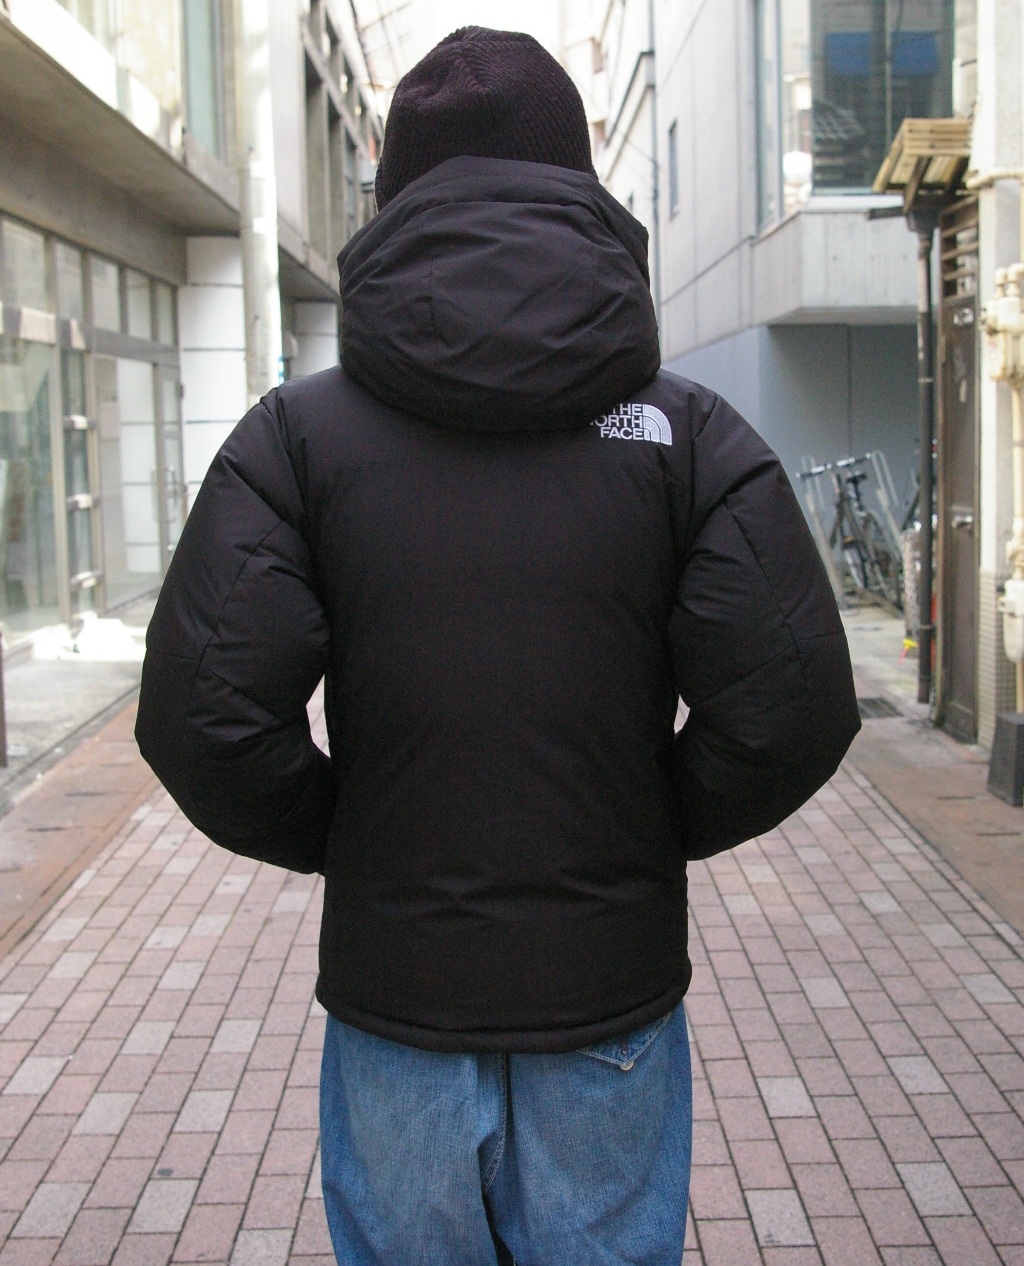 LIFE STORE / FREEDOM: THE NORTH FACE BALTRO LIGHT JACKET